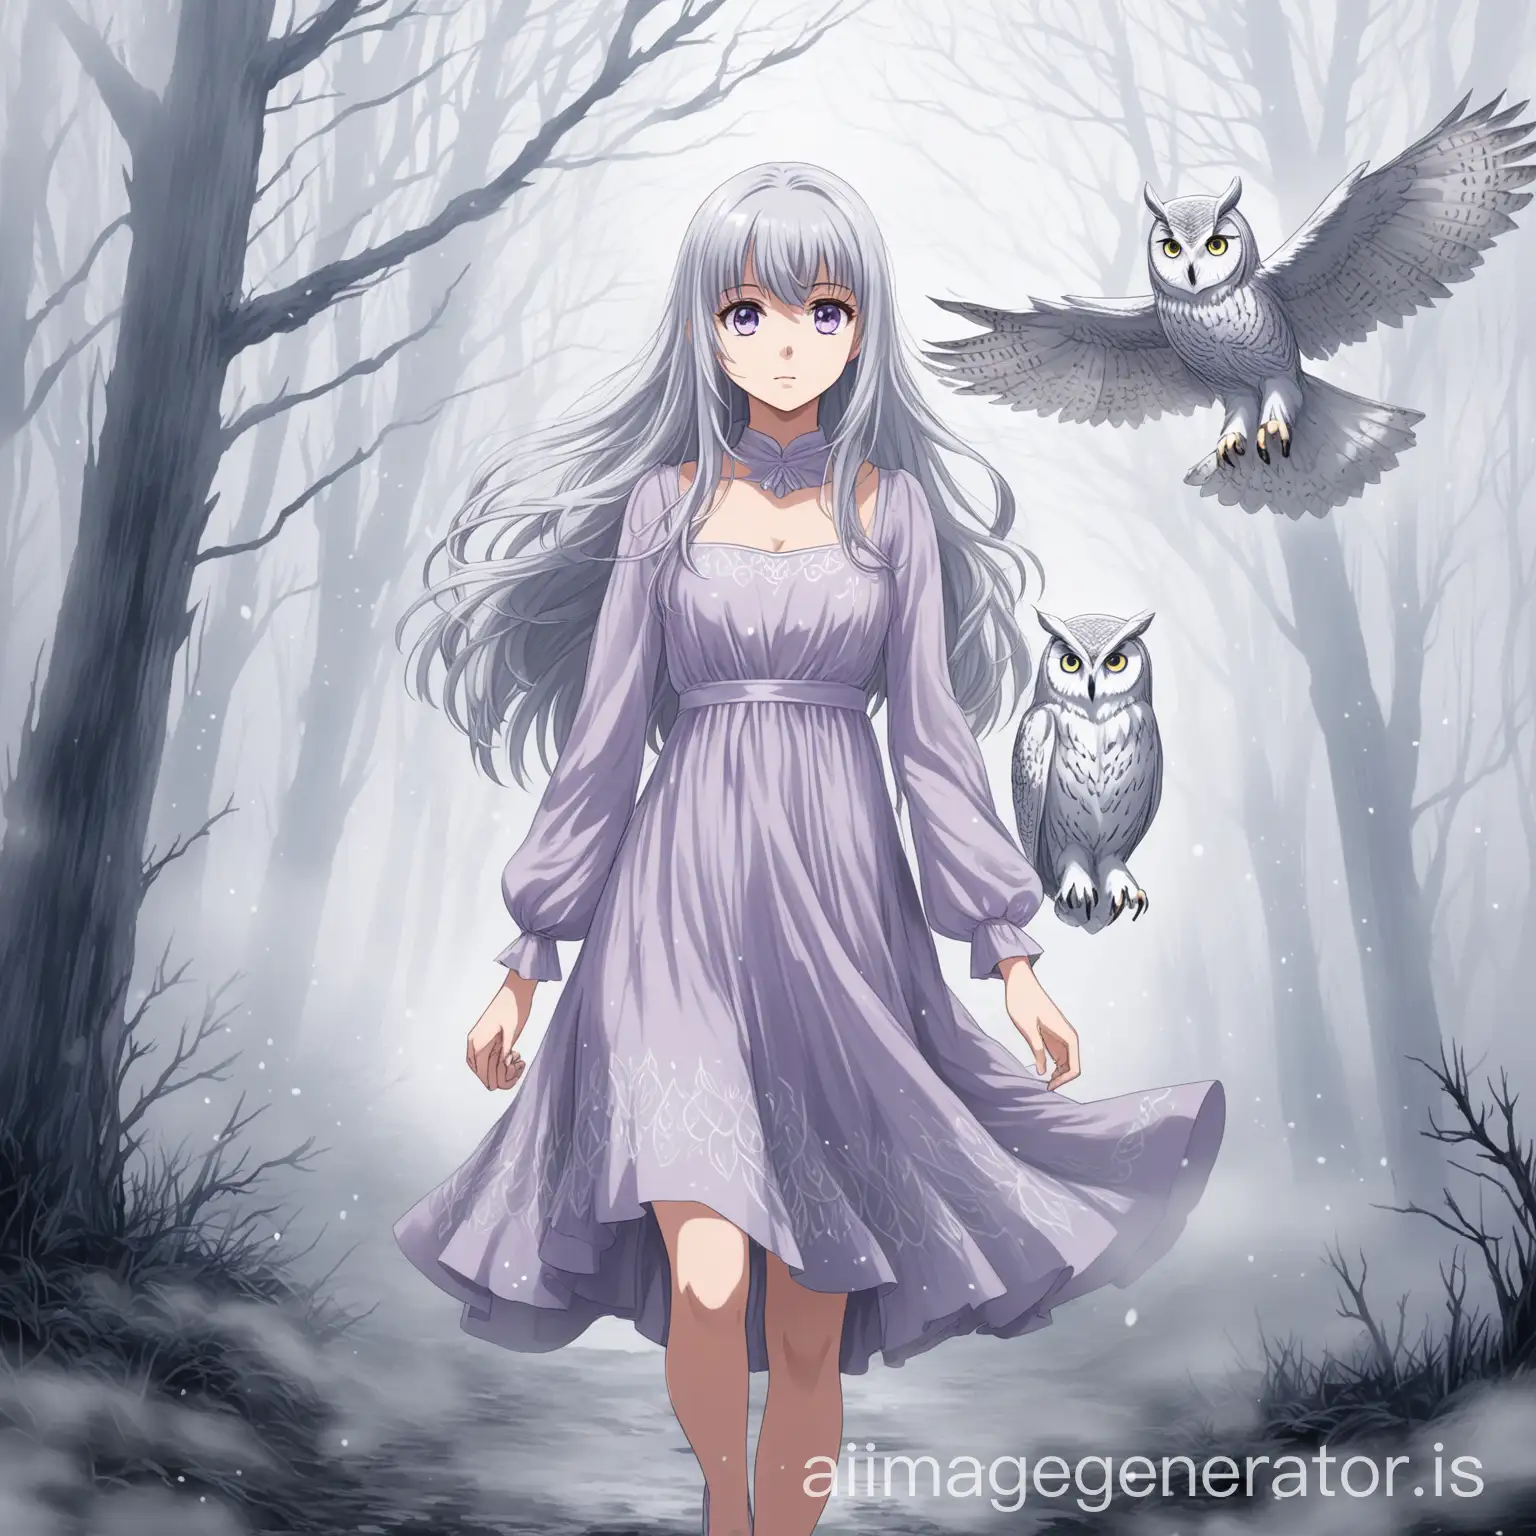 Ethereal-Anime-Girl-Strolling-in-Mist-with-Silver-Owl-Companion